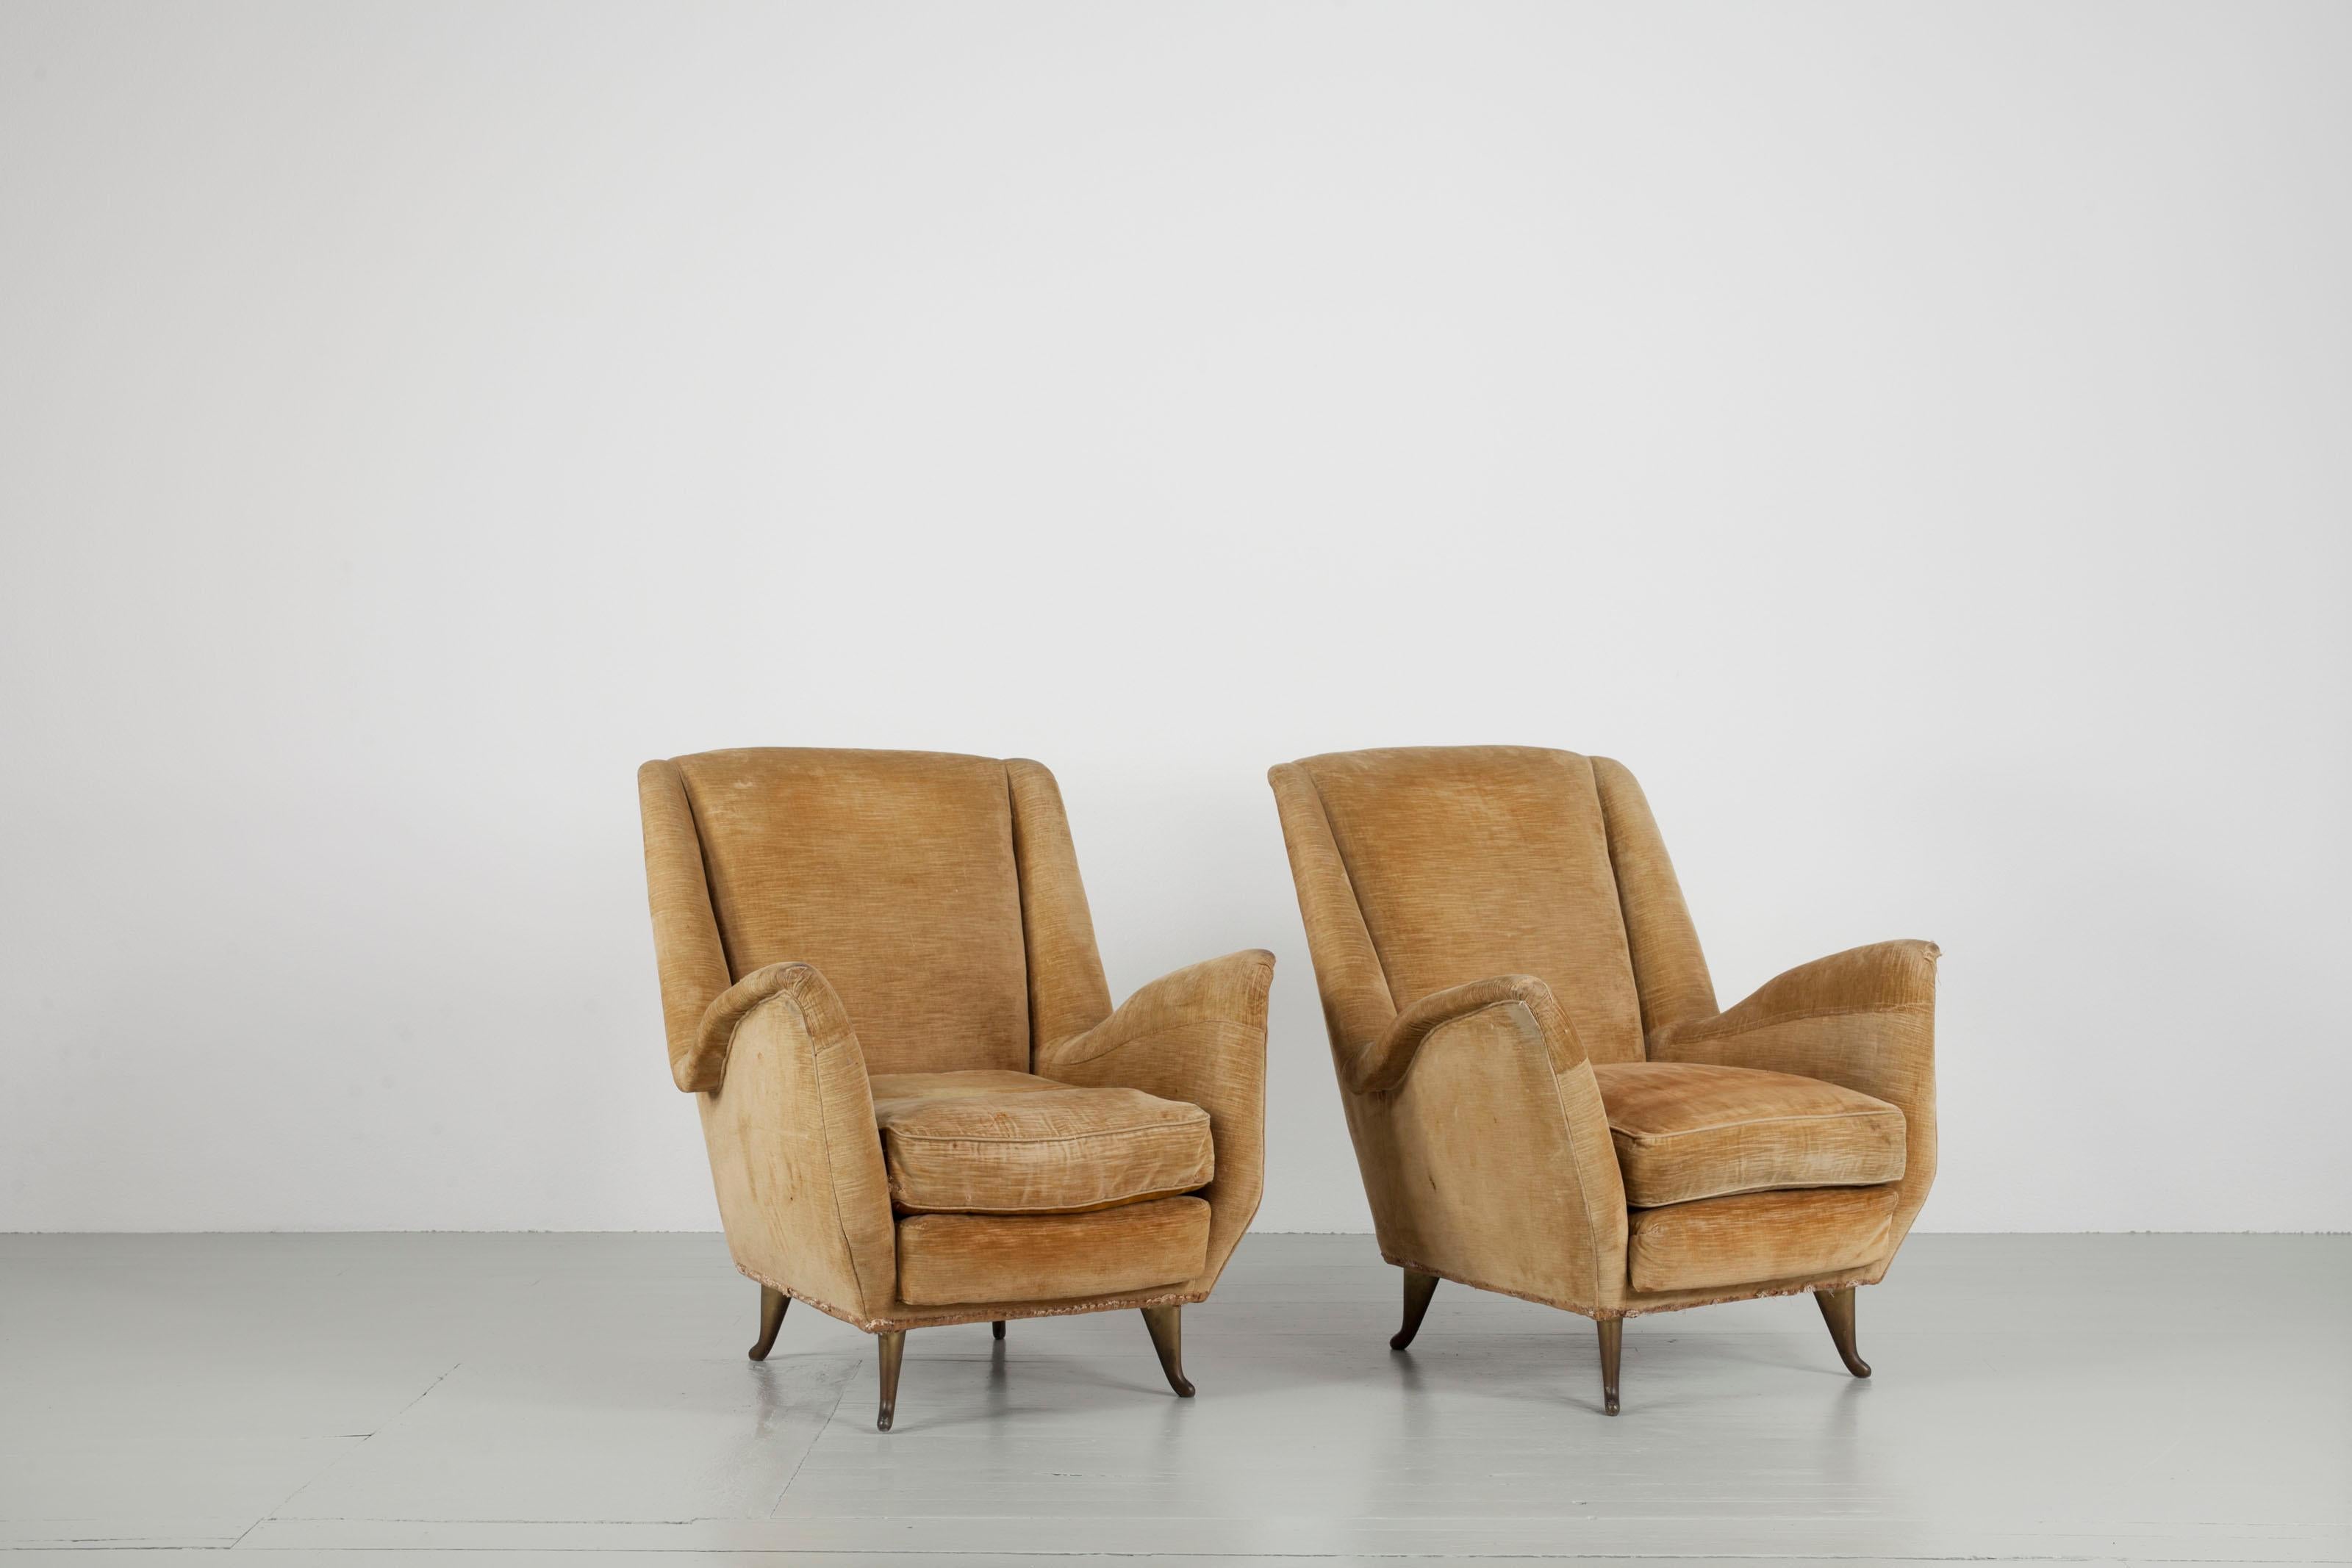 Set of two cream colored wingback chairs, design and manufacturer I. S. A. Bergamo, Italy, 1950s. The chairs come with exceptional dainty feet. The chairs needs a new upholstery.

Feel free to contact us for more detailed pictures.